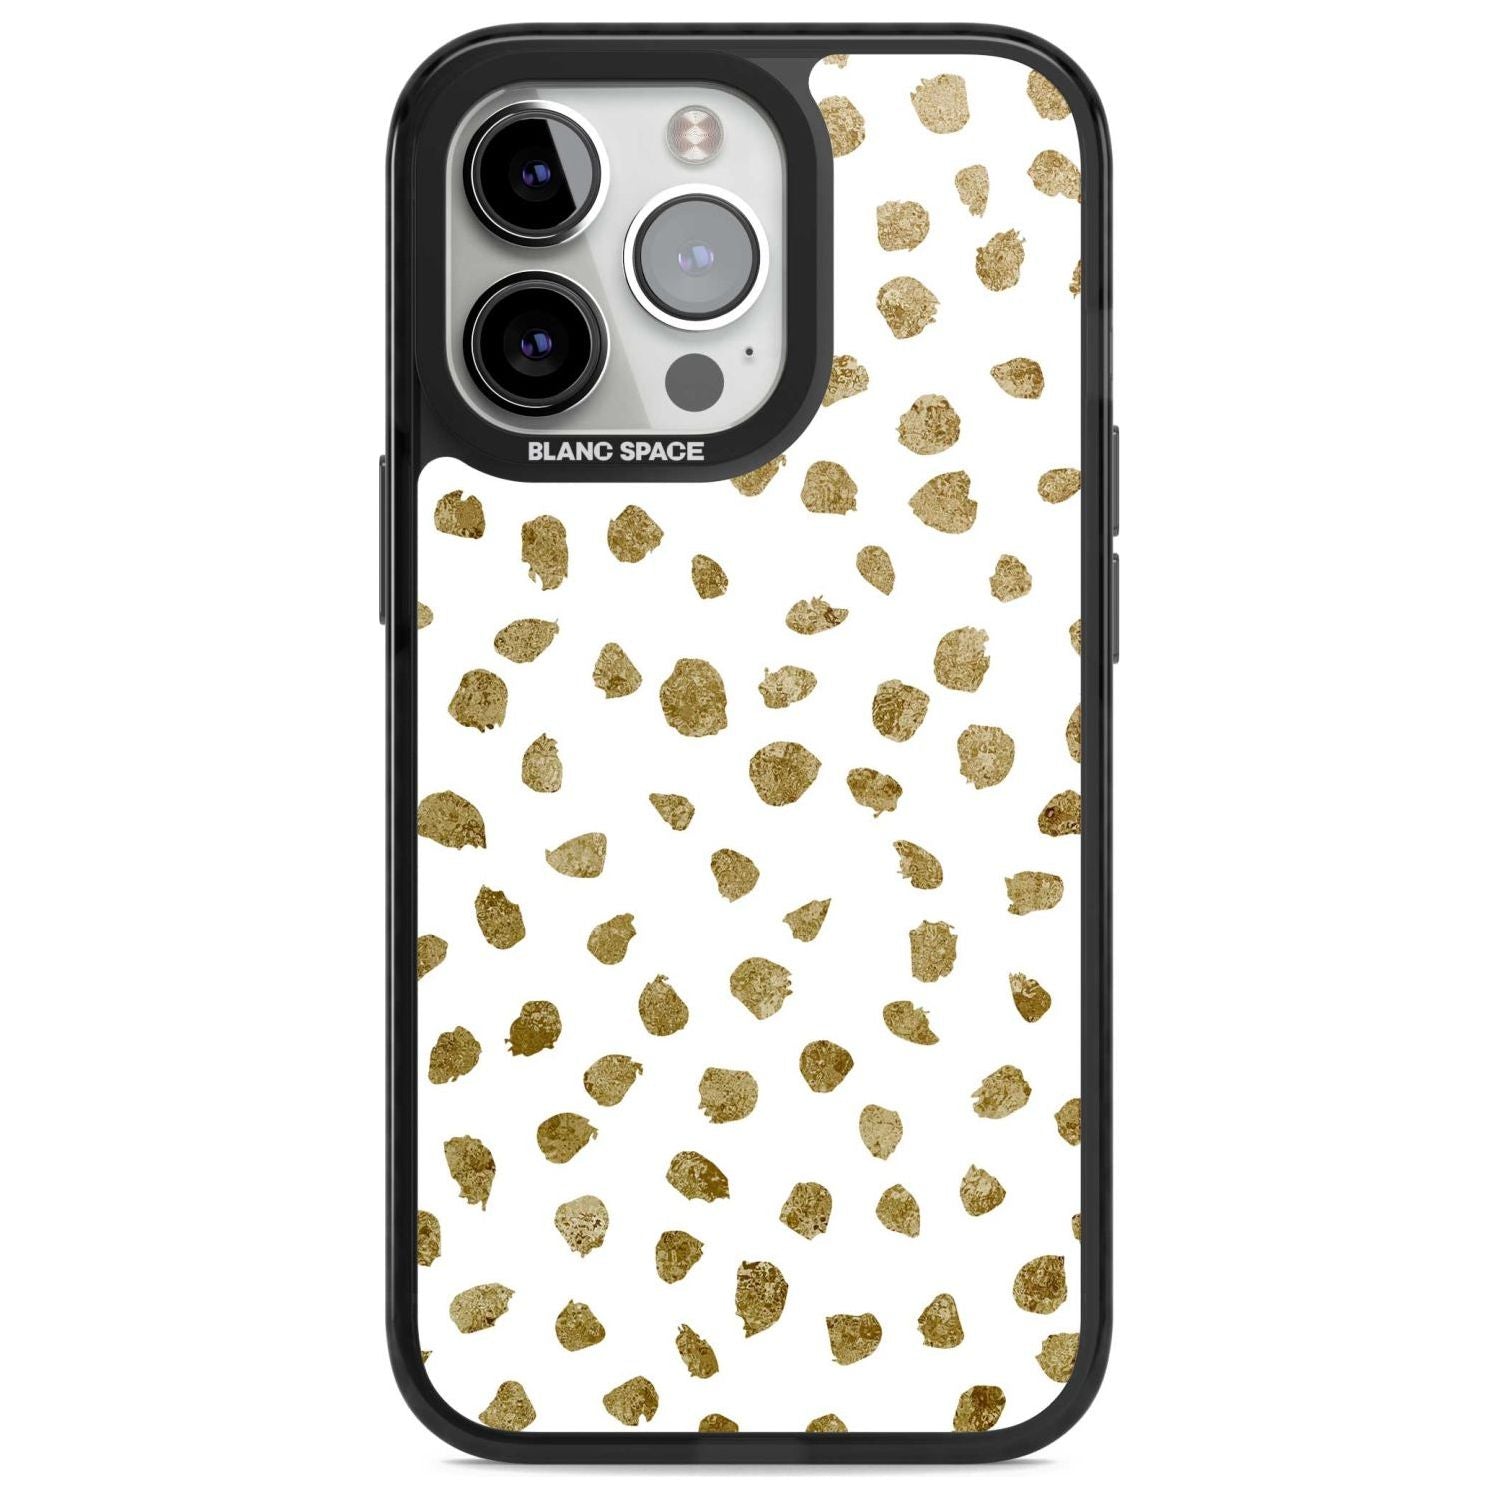 Gold Look on White Dalmatian Polka Dot Spots Phone Case iPhone 15 Pro Max / Magsafe Black Impact Case,iPhone 15 Pro / Magsafe Black Impact Case,iPhone 14 Pro Max / Magsafe Black Impact Case,iPhone 14 Pro / Magsafe Black Impact Case,iPhone 13 Pro / Magsafe Black Impact Case Blanc Space